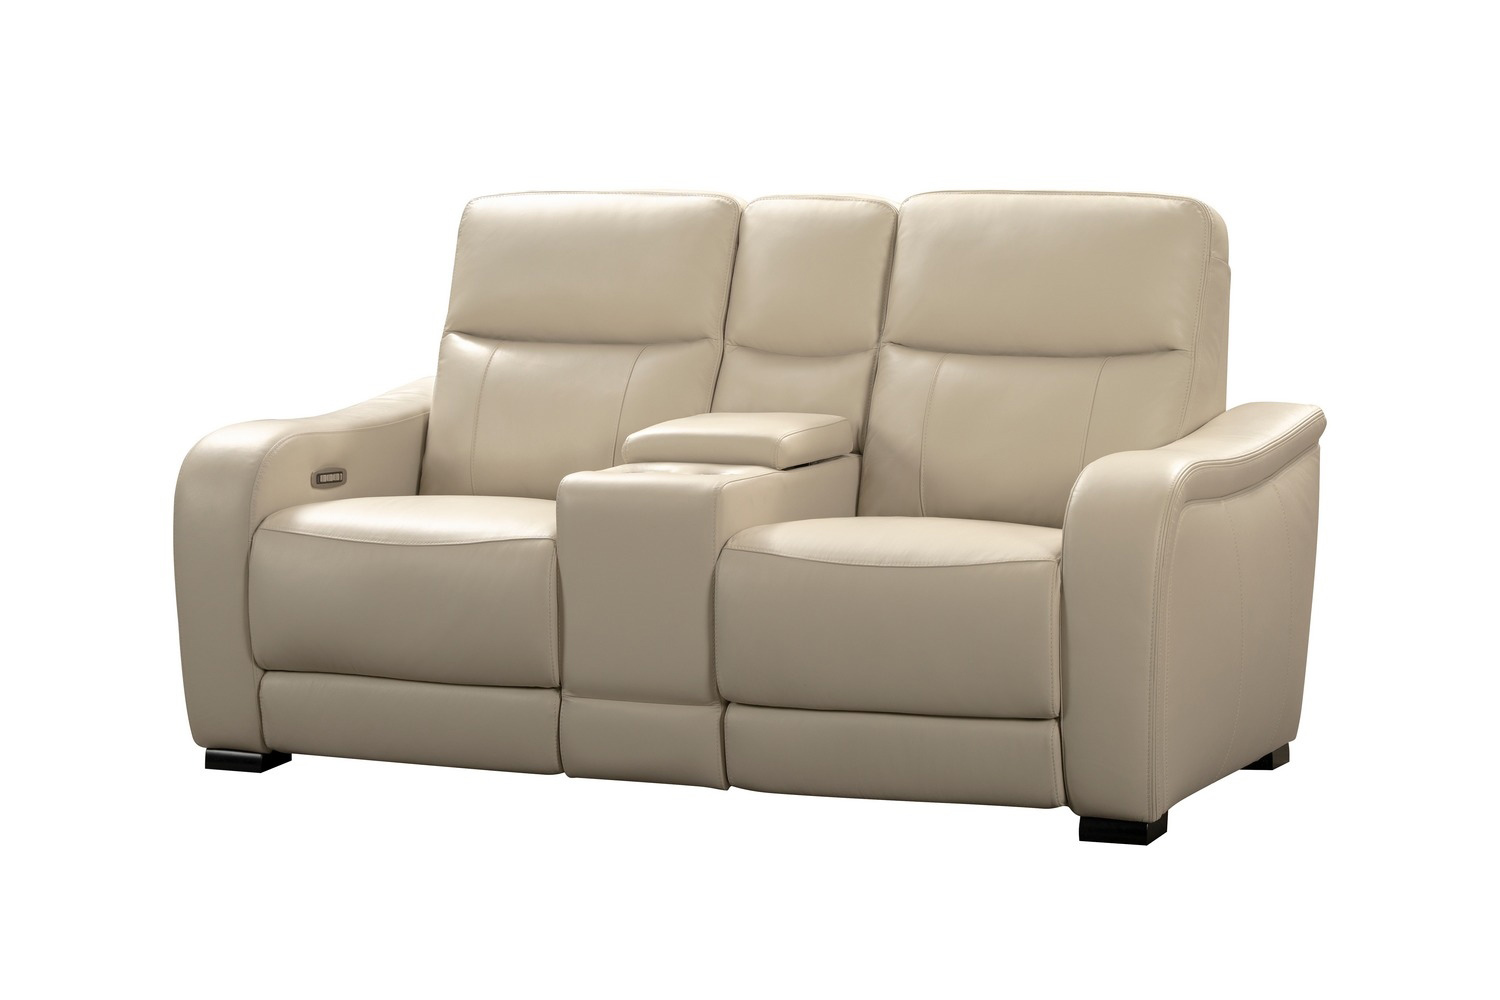 Barcalounger Electra Power Reclining Console Loveseat with Power Head Rests and Power Lumbar - Laurel Cream/Leather Match